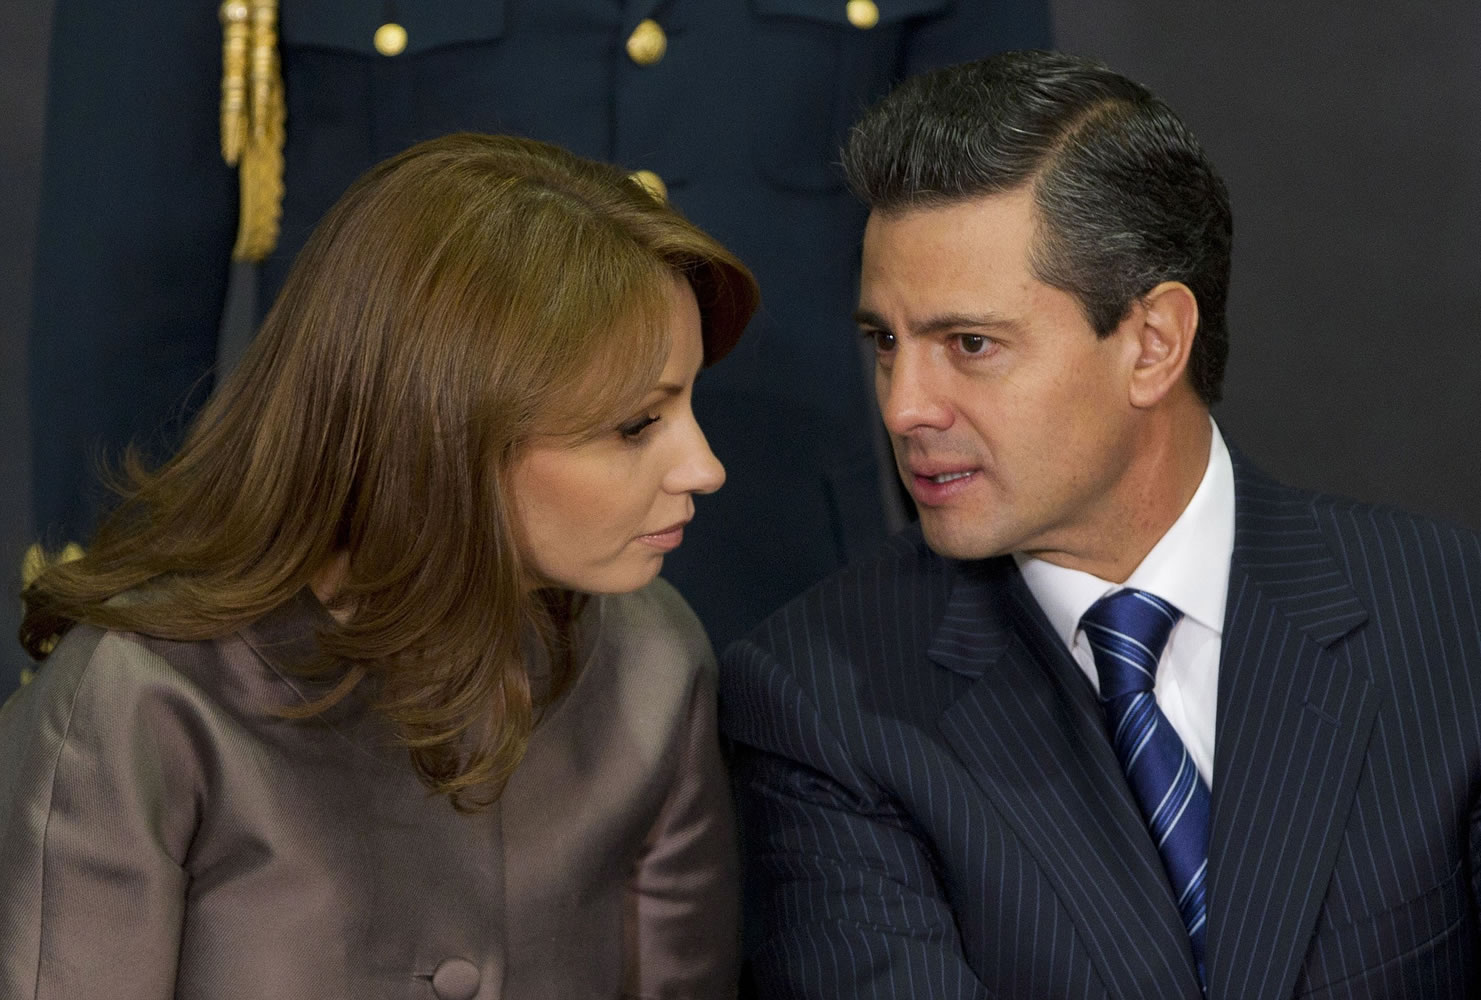 Mexico's President Enrique Pena Nieto, right, speaks to his wife Angelica Rivera as they attend a ceremony launching the program &quot;Life insurance for female heads of family&quot; at Los Pinos presidential residence in Mexico City.